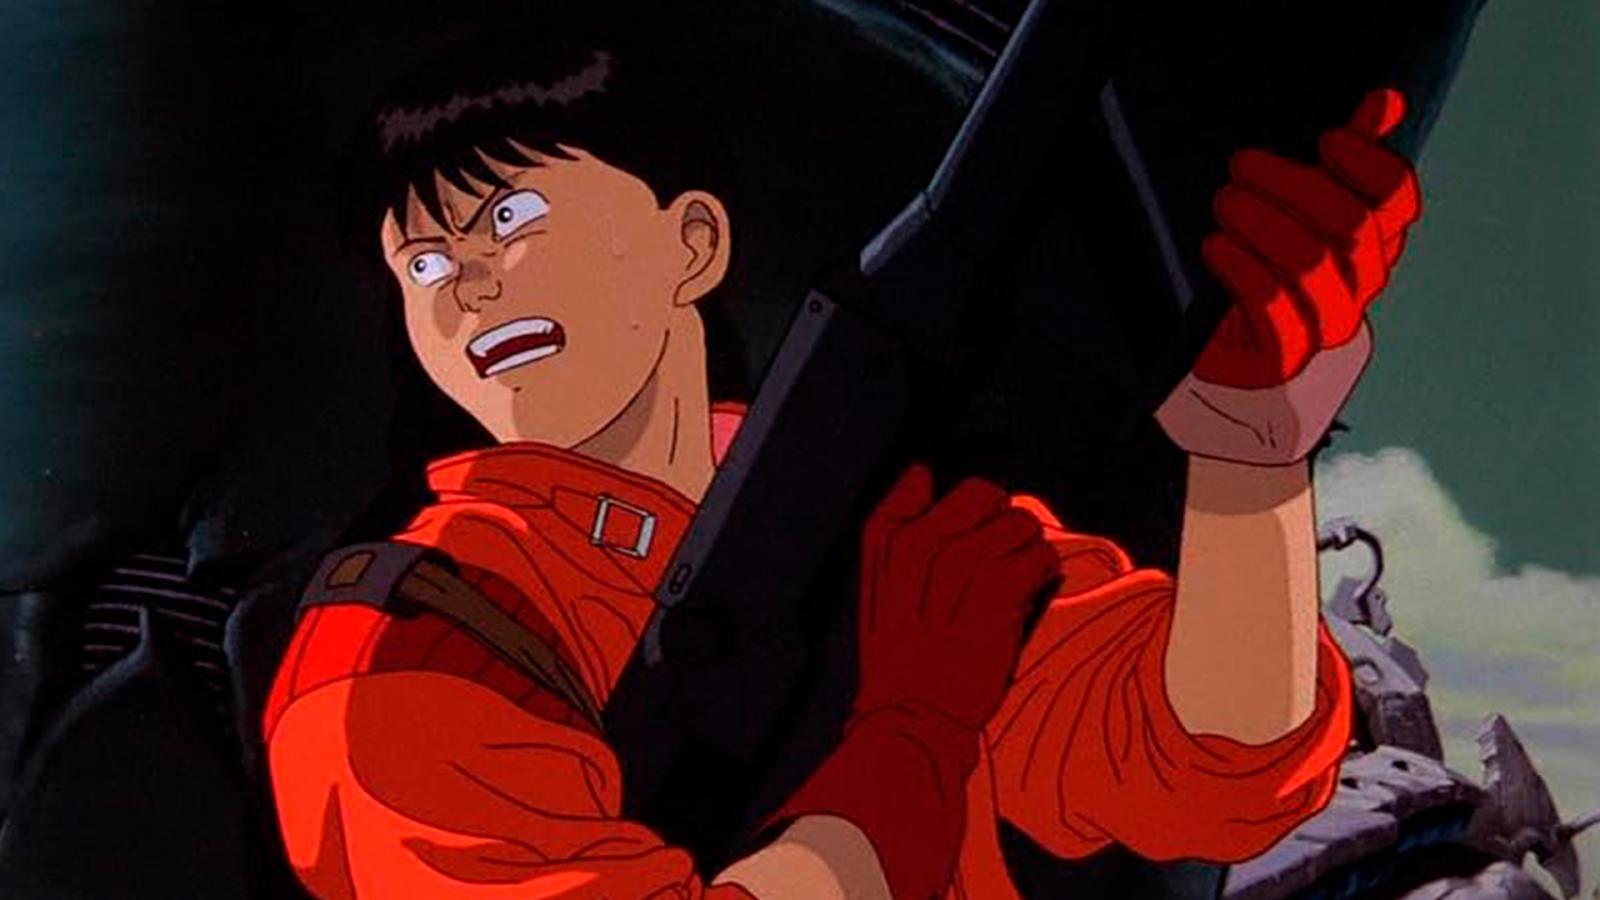 'Cursed' Adaptation Of Iconic Cyberpunk Anime Once Led To Conflict With BMW - image 1